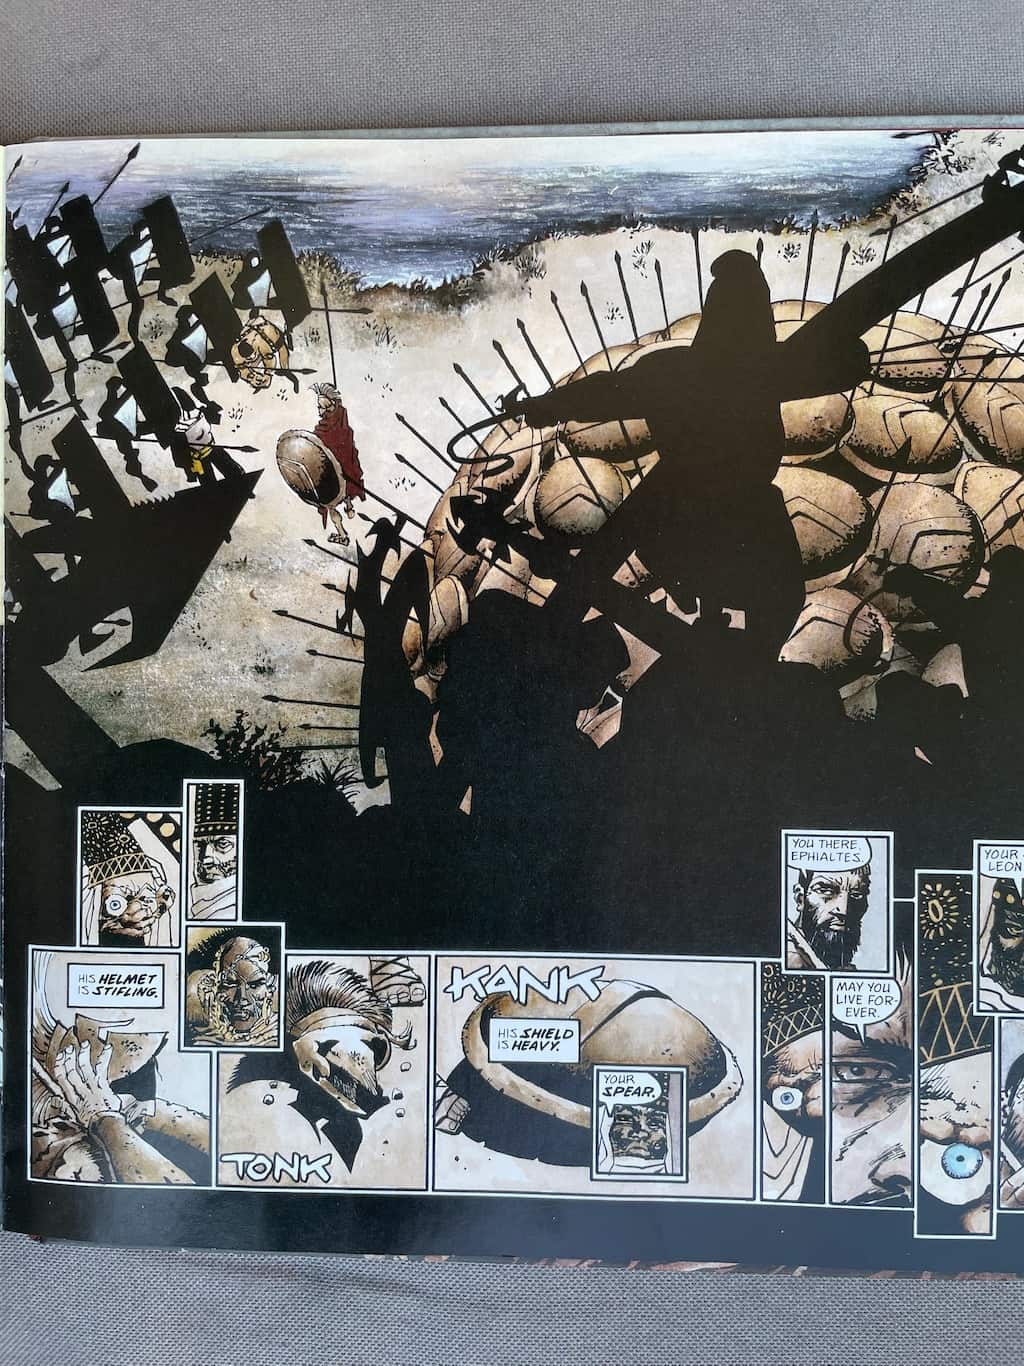 Spartan Soldiers in 300 Graphic Novel